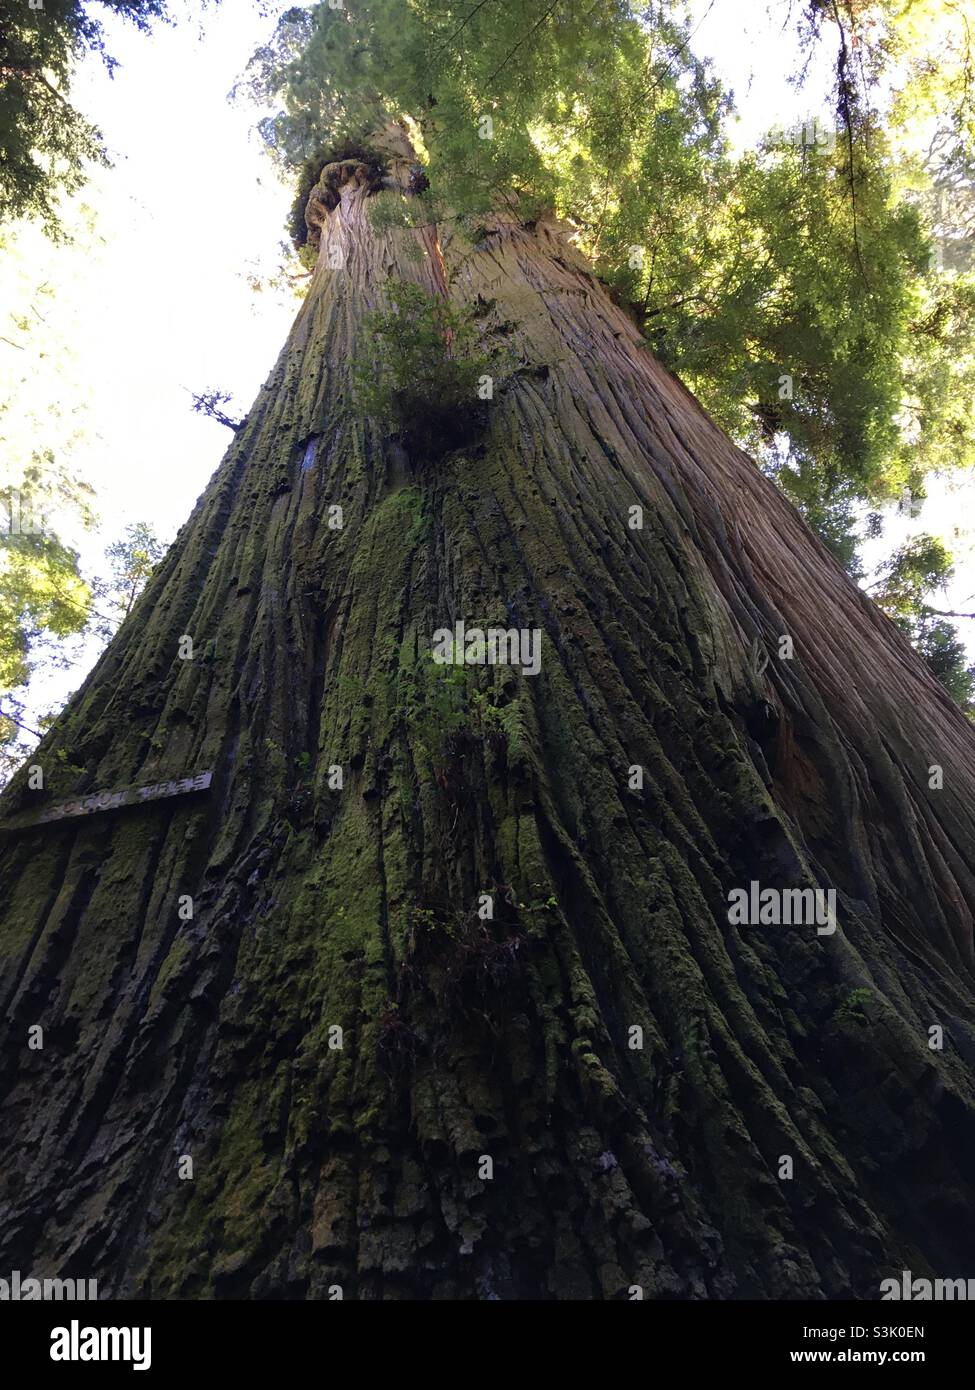 Boy Scout Tree at Jedediah Smith Redwoods State Park Crescent City California Stock Photo